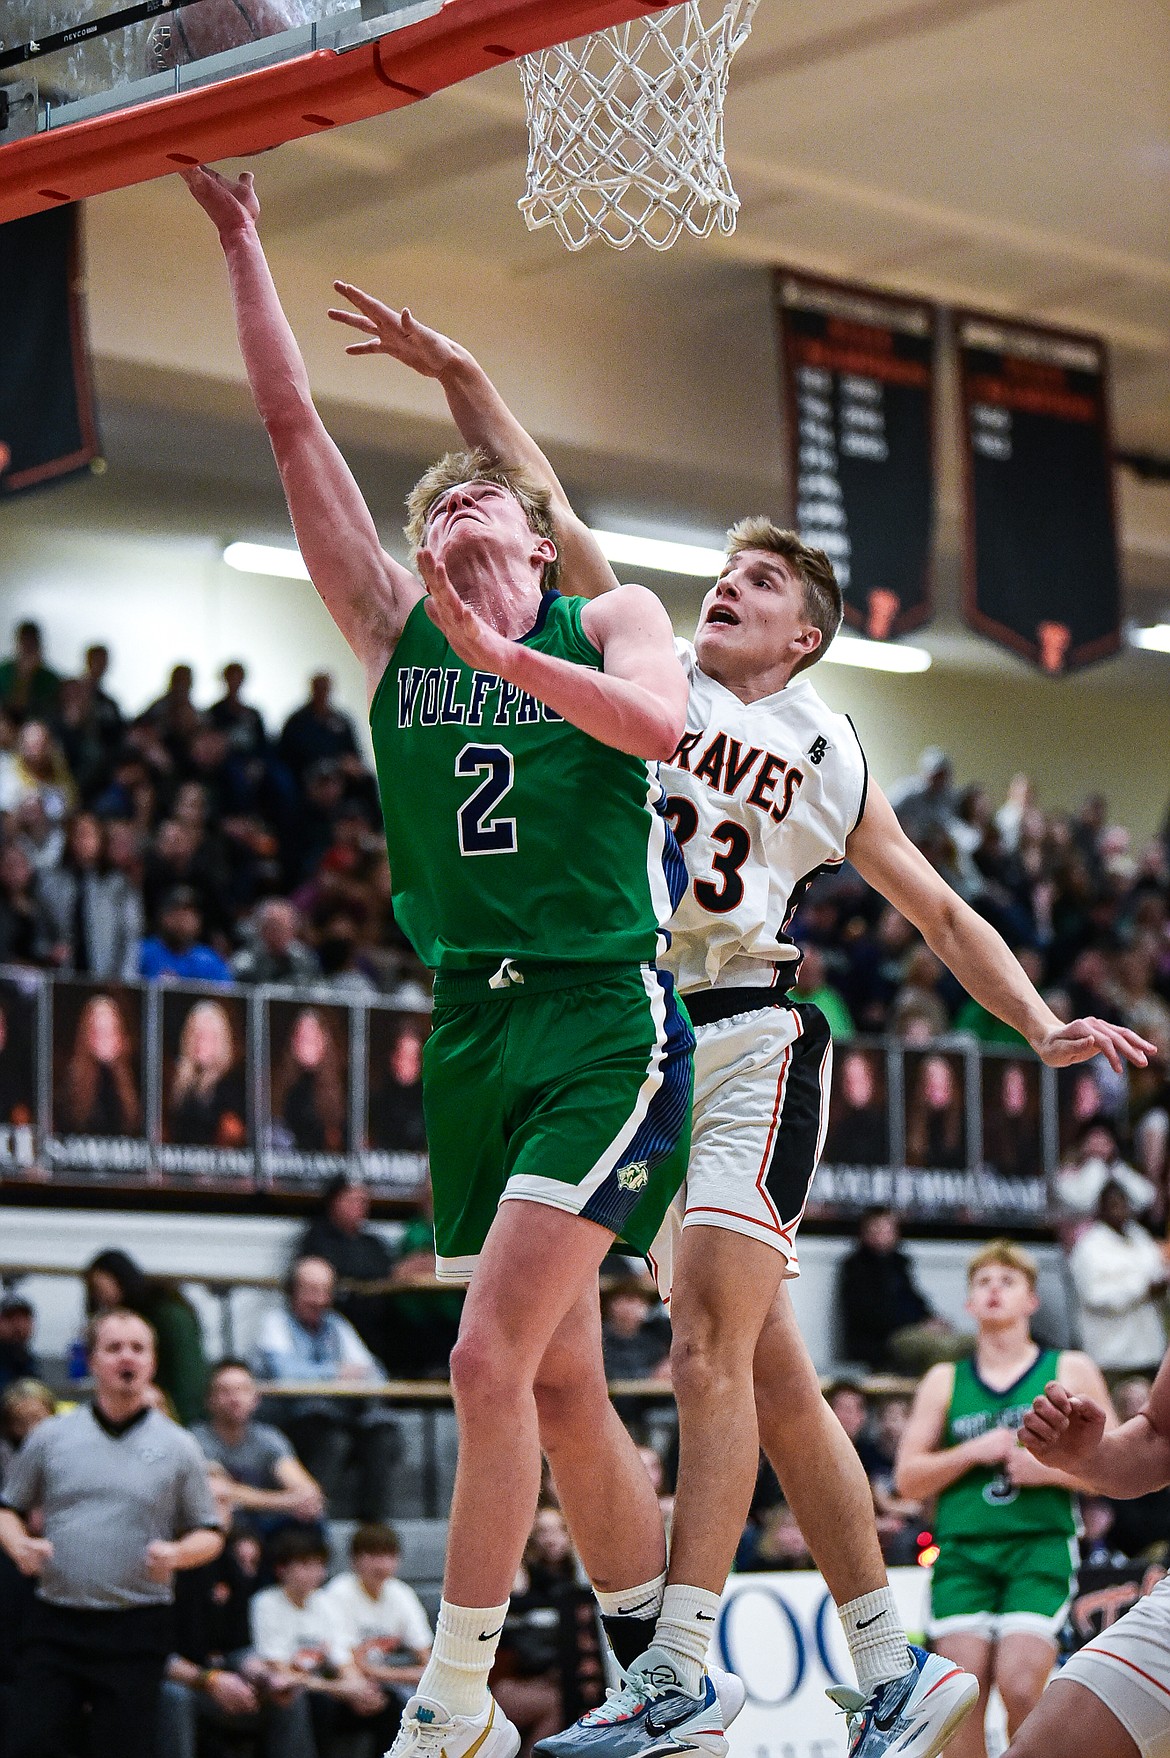 Glacier's Liam Ells (2) drives to the basket guarded by Flathead's Korbin Eaton (33) in the first half at Flathead High School on Friday, Jan. 19. (Casey Kreider/Daily Inter Lake)